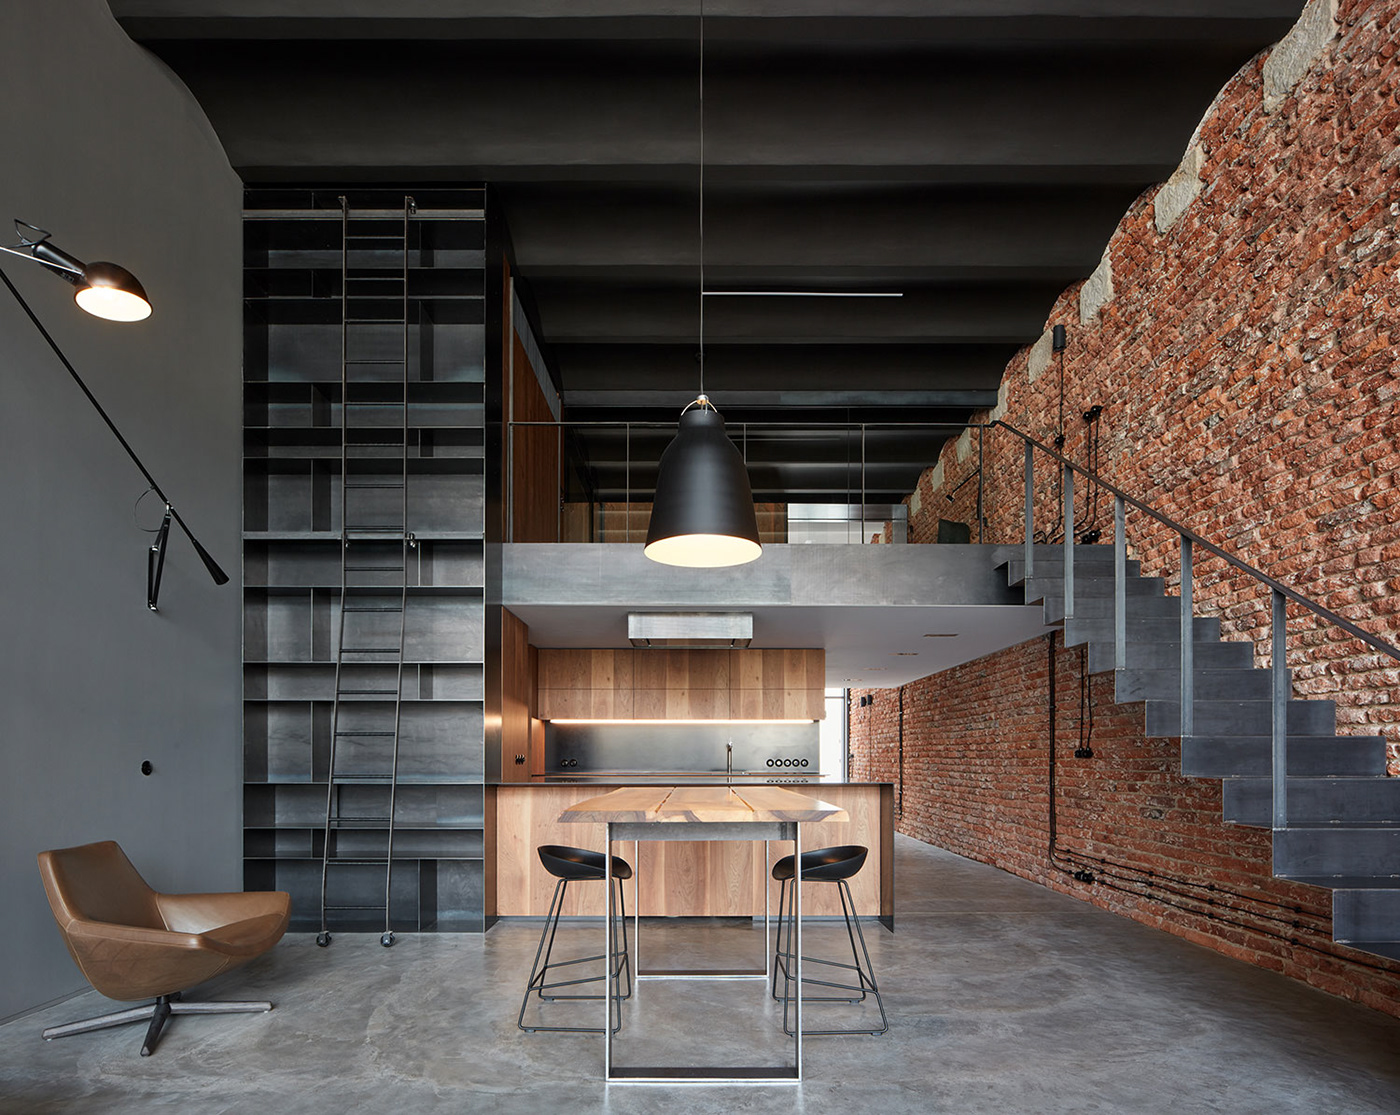 LOFT apartments interiors design architects industrial style